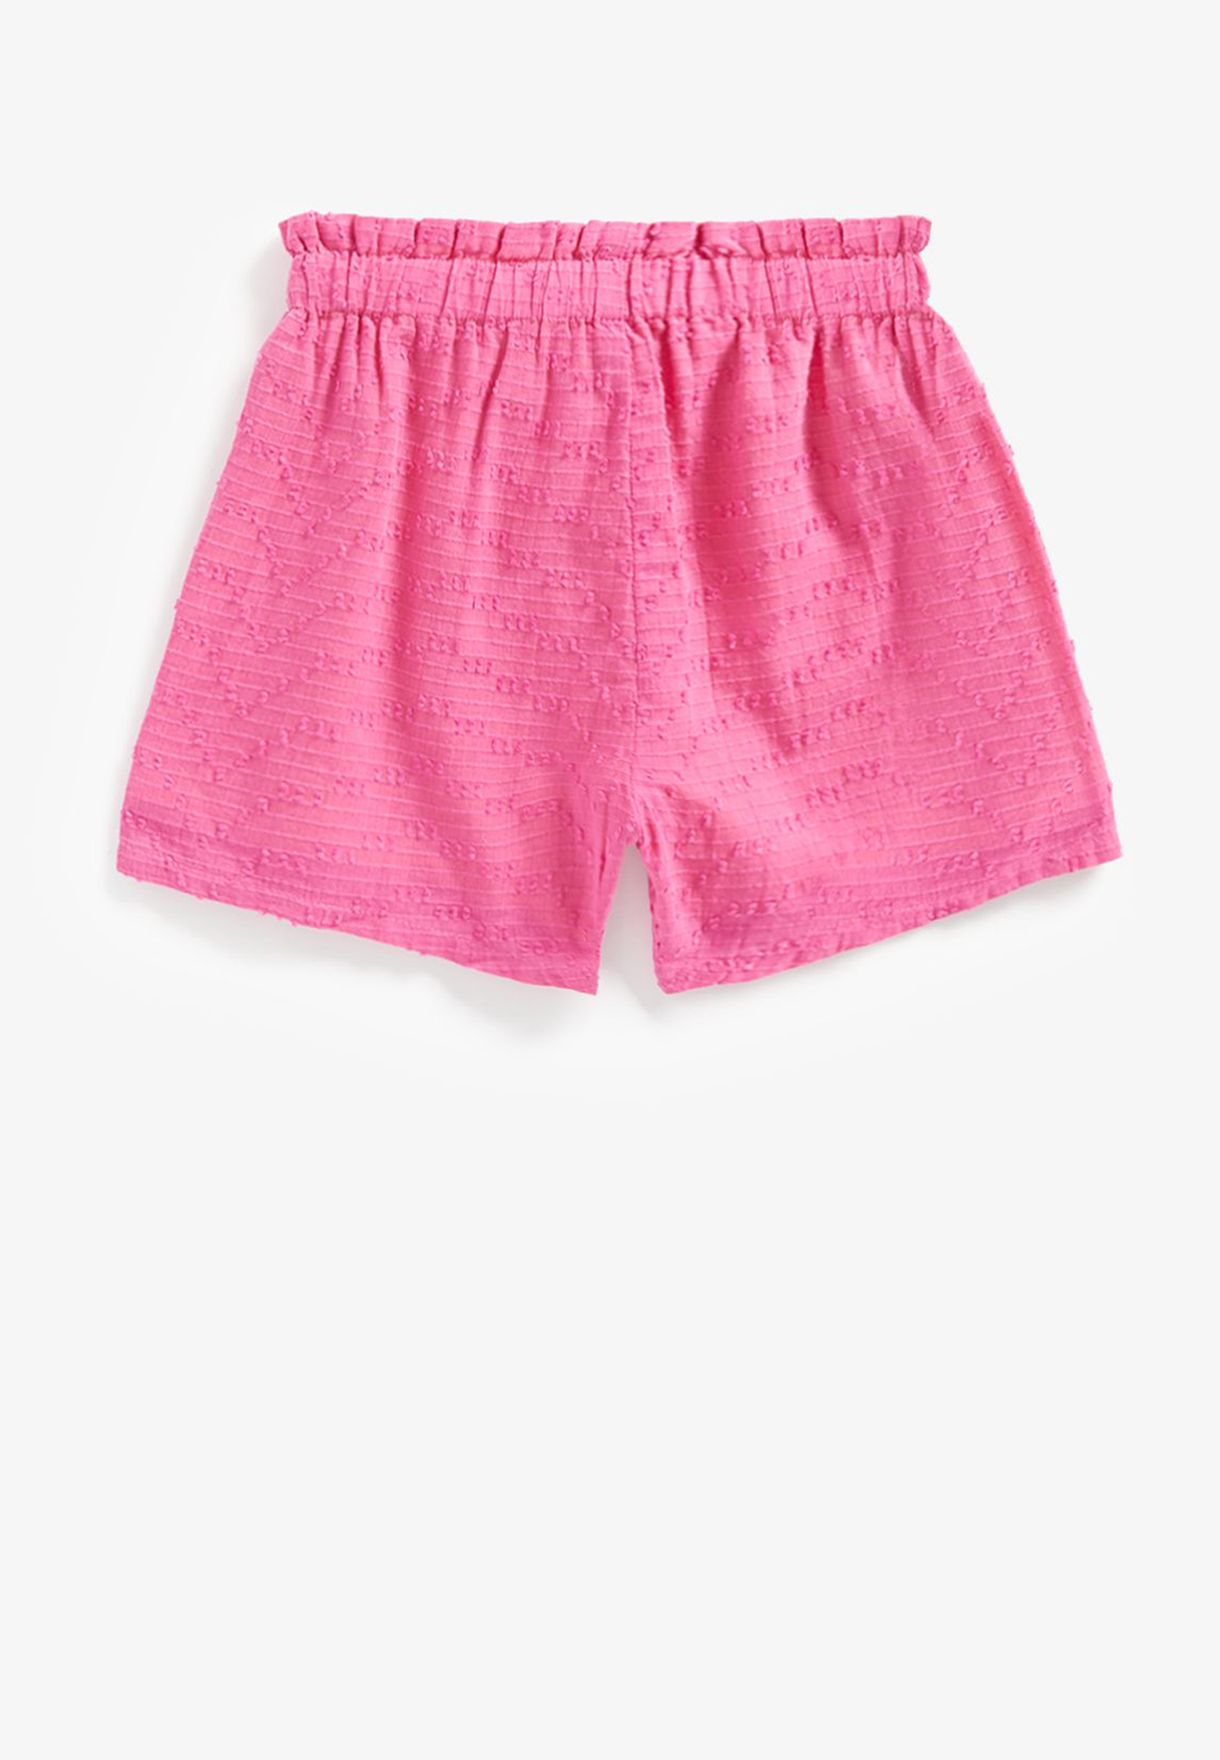 Youth Textured Shorts